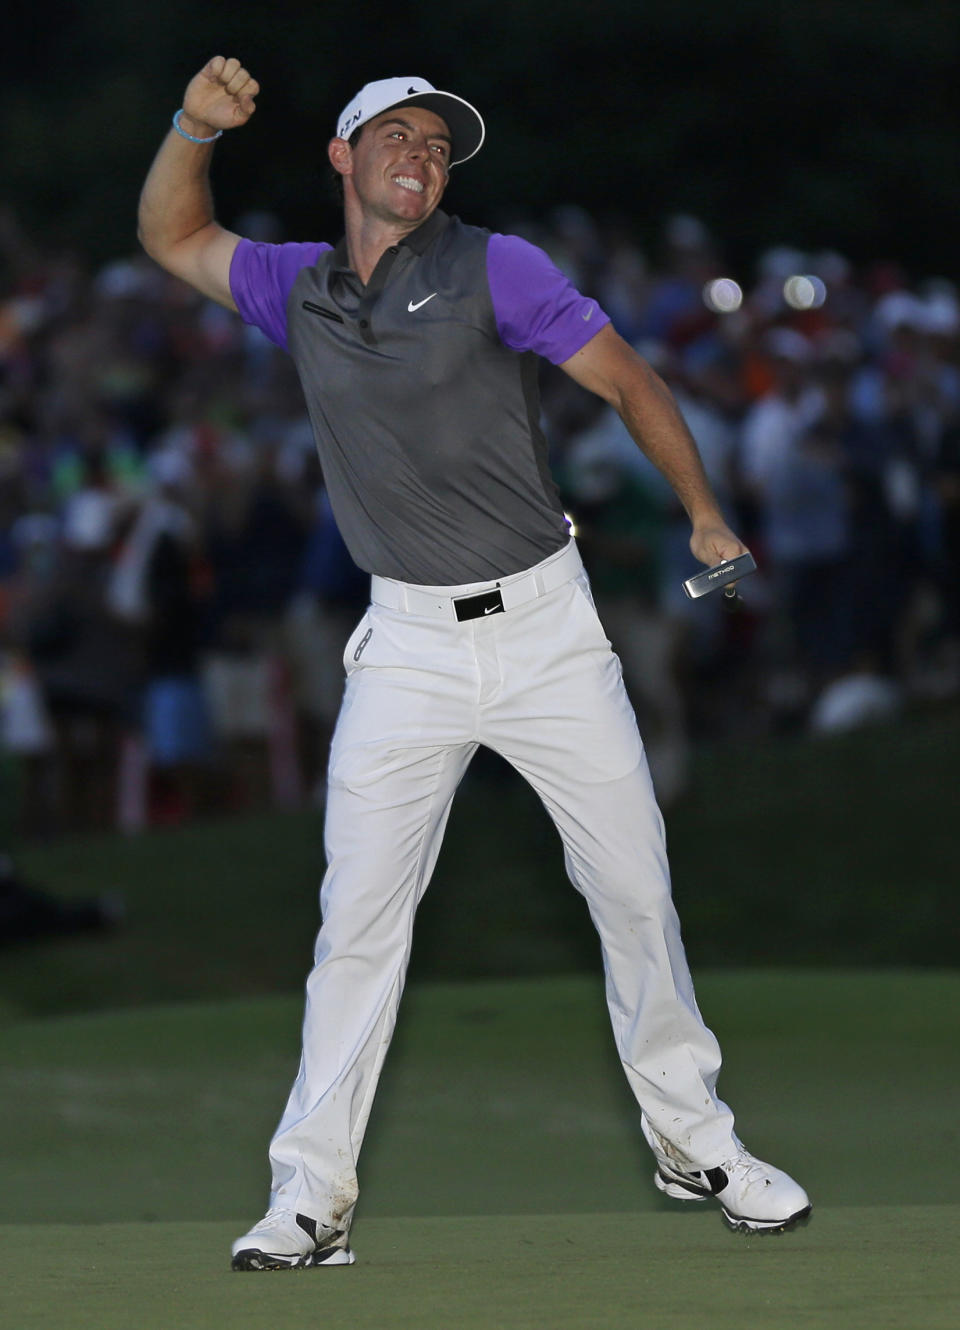 Rory McIlroy, of Northern Ireland, celebrates after winning the PGA Championship golf tournament at Valhalla Golf Club on Aug. 10, 2014, in Louisville, Ky. McIlroy has not won another major championship since then. The PGA returns to Valhalla on May 16-19, 2024. (AP Photo/David J. Phillip, File)